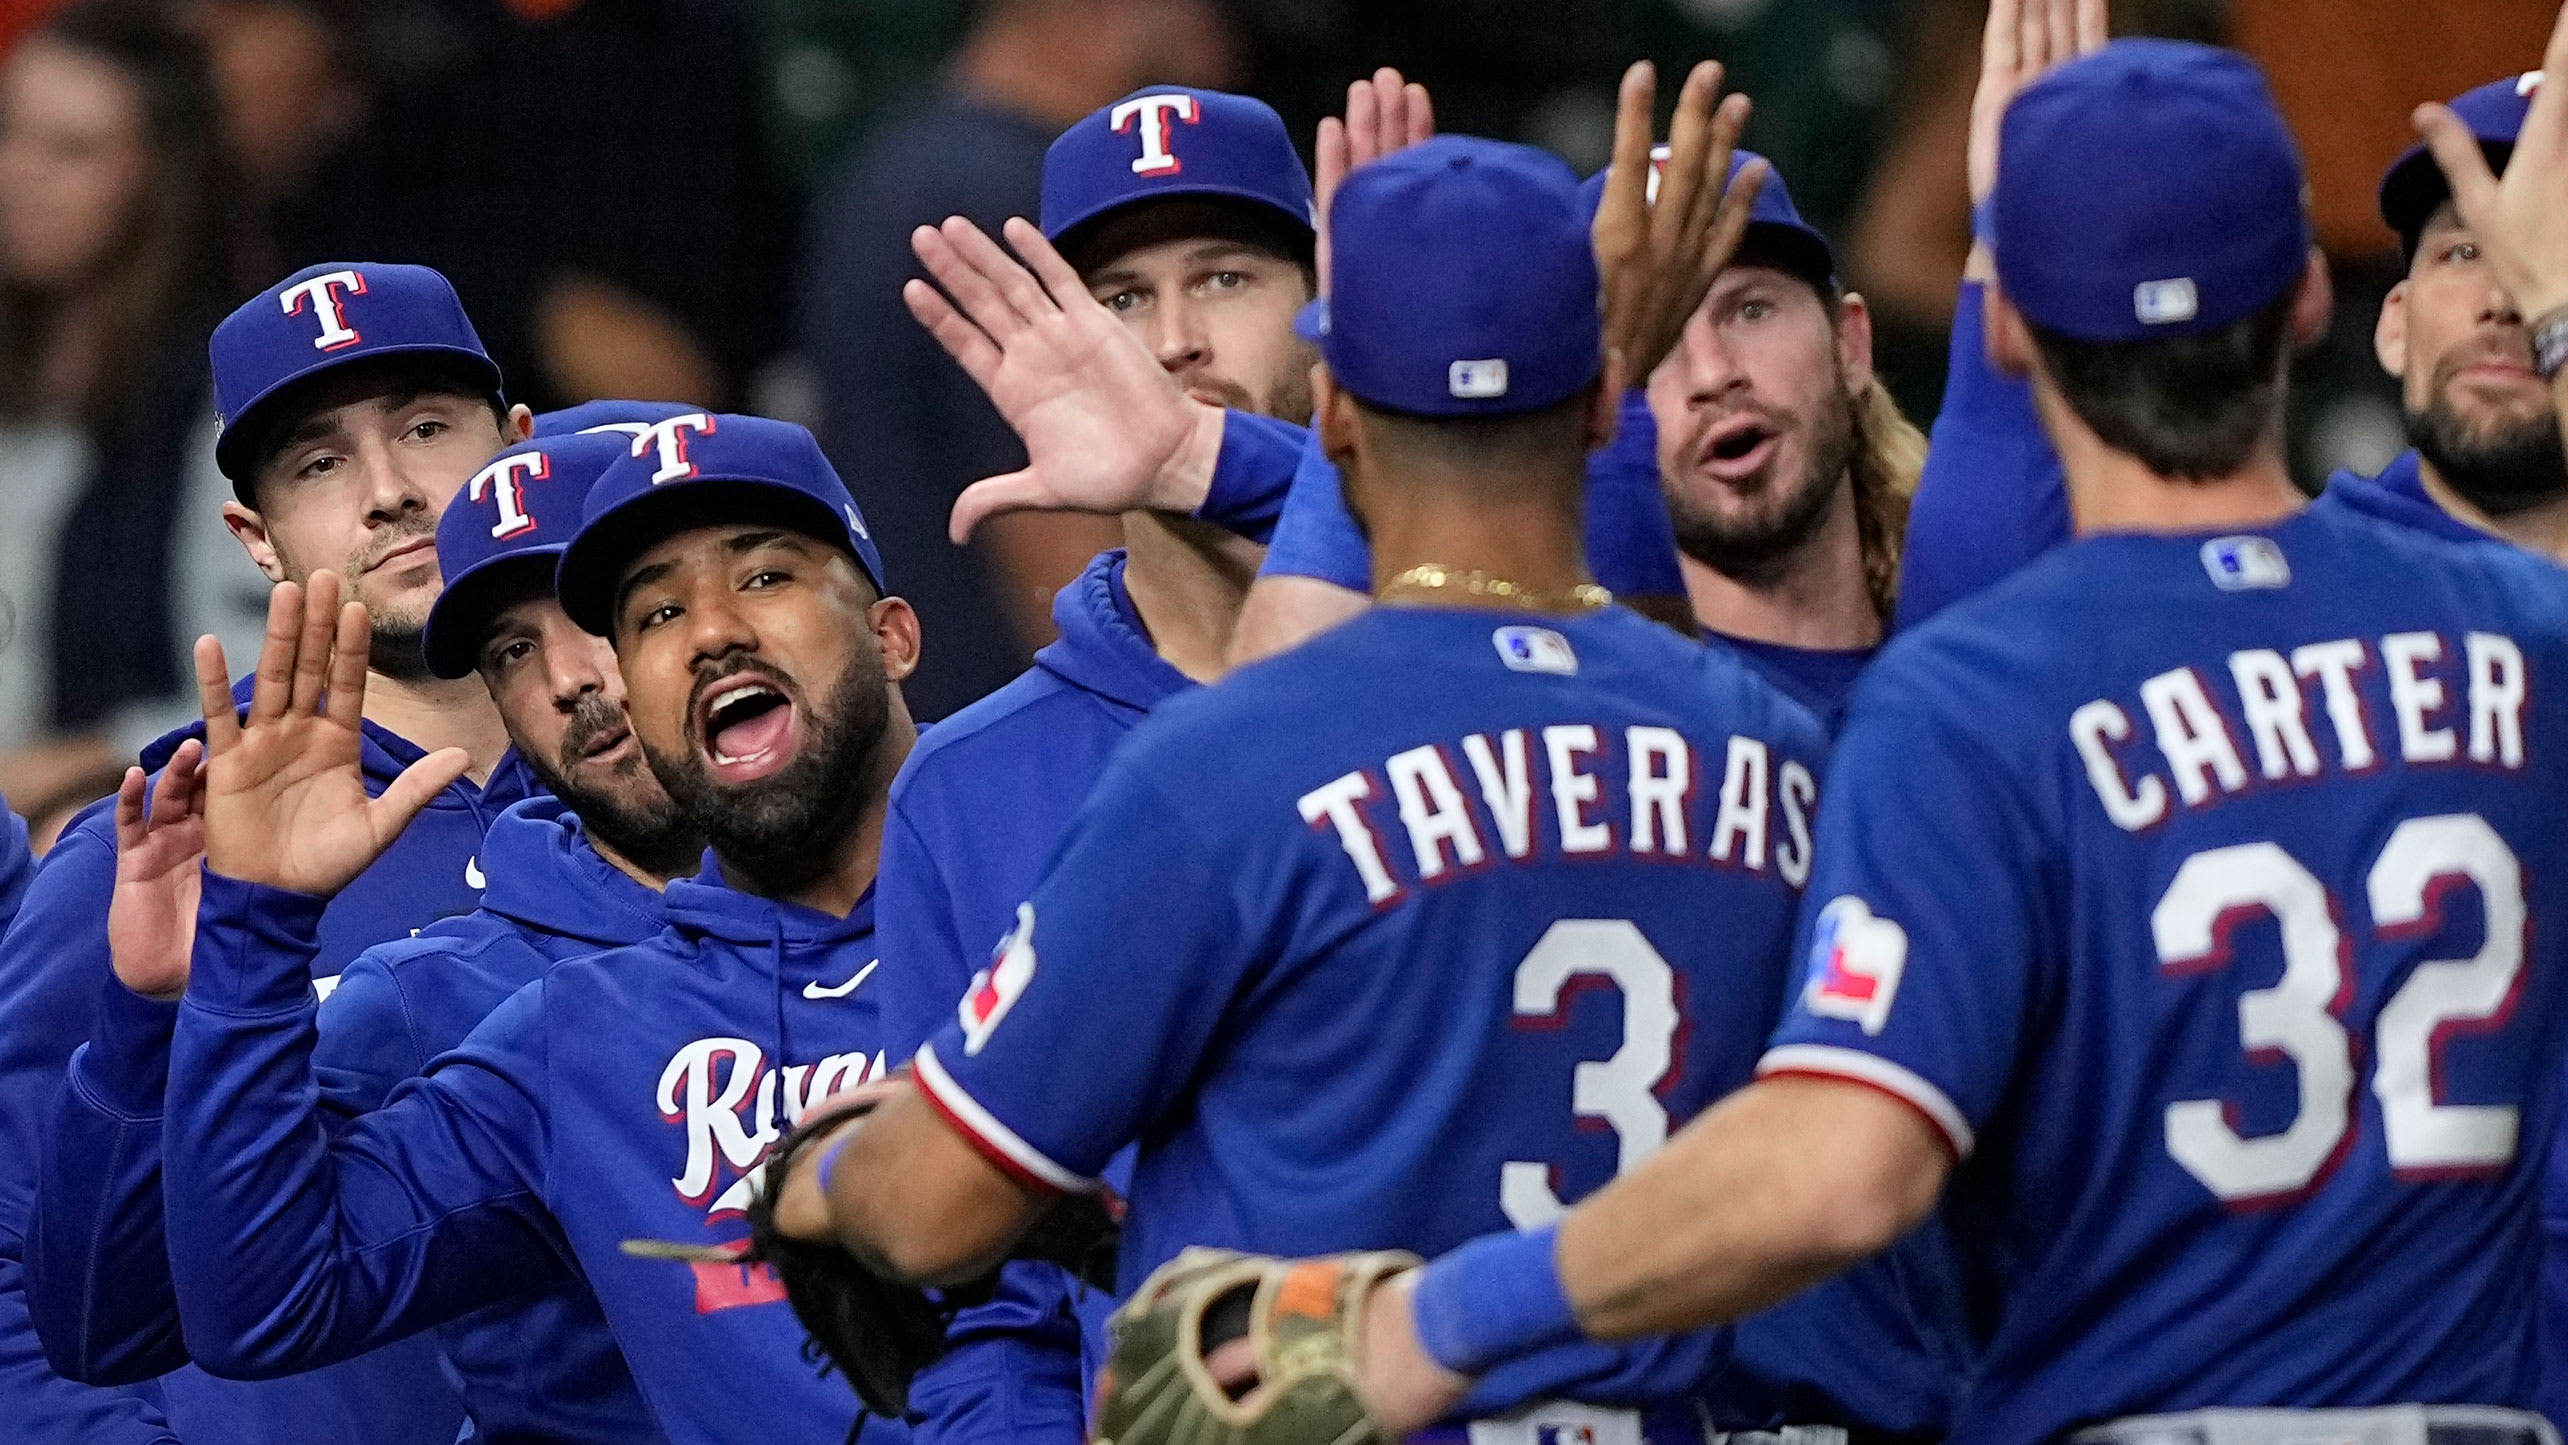 The Rangers celebrate their Game 1 win